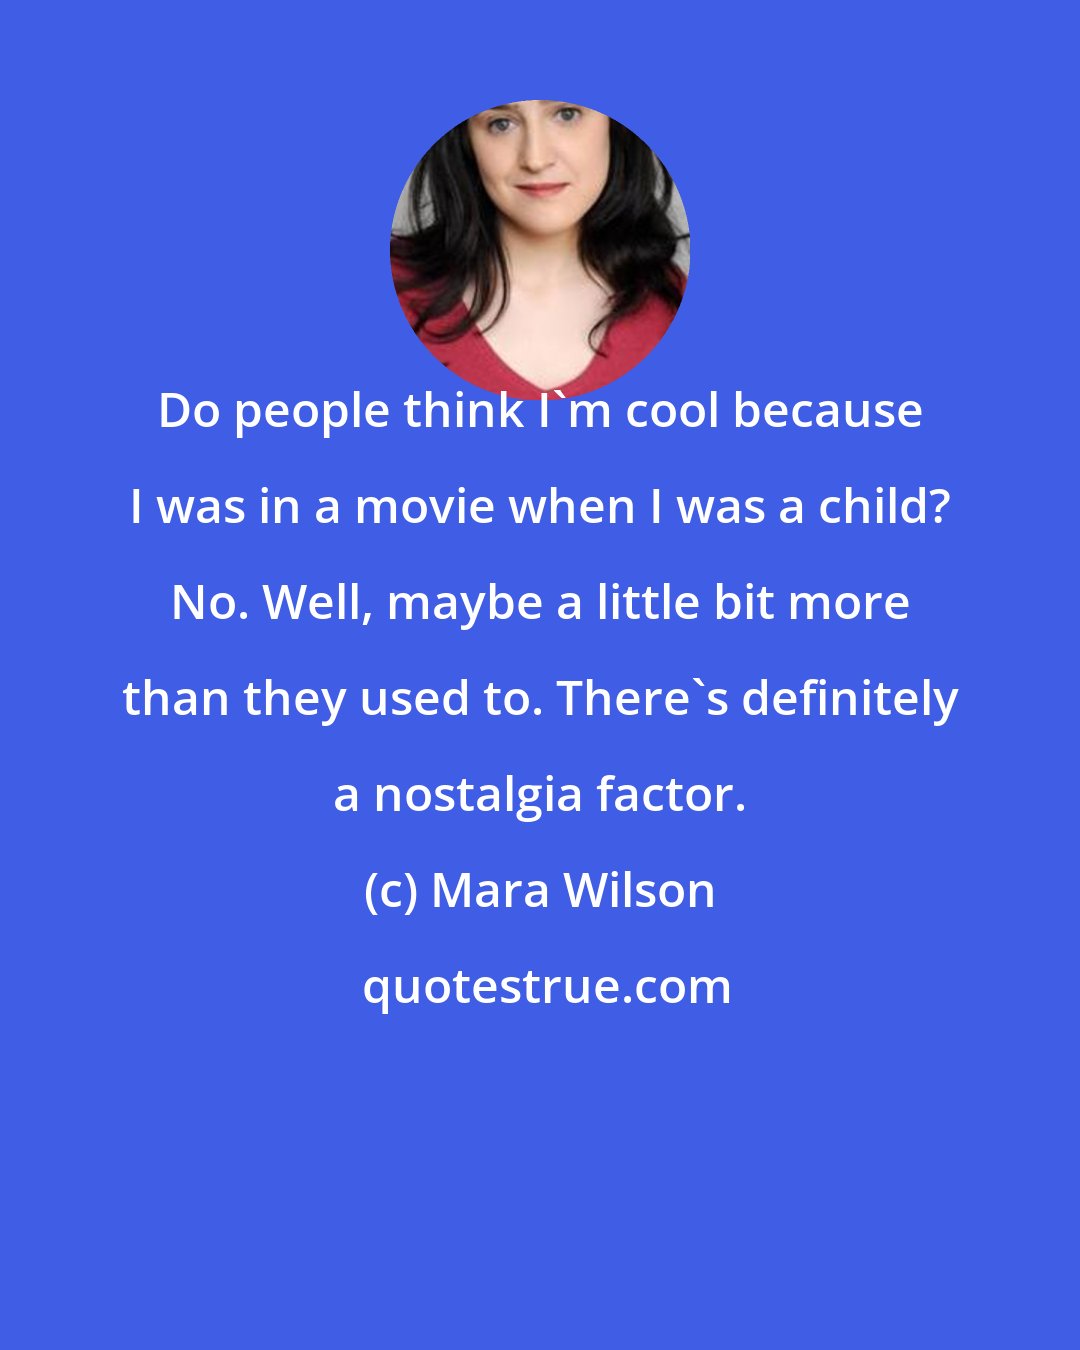 Mara Wilson: Do people think I'm cool because I was in a movie when I was a child? No. Well, maybe a little bit more than they used to. There's definitely a nostalgia factor.